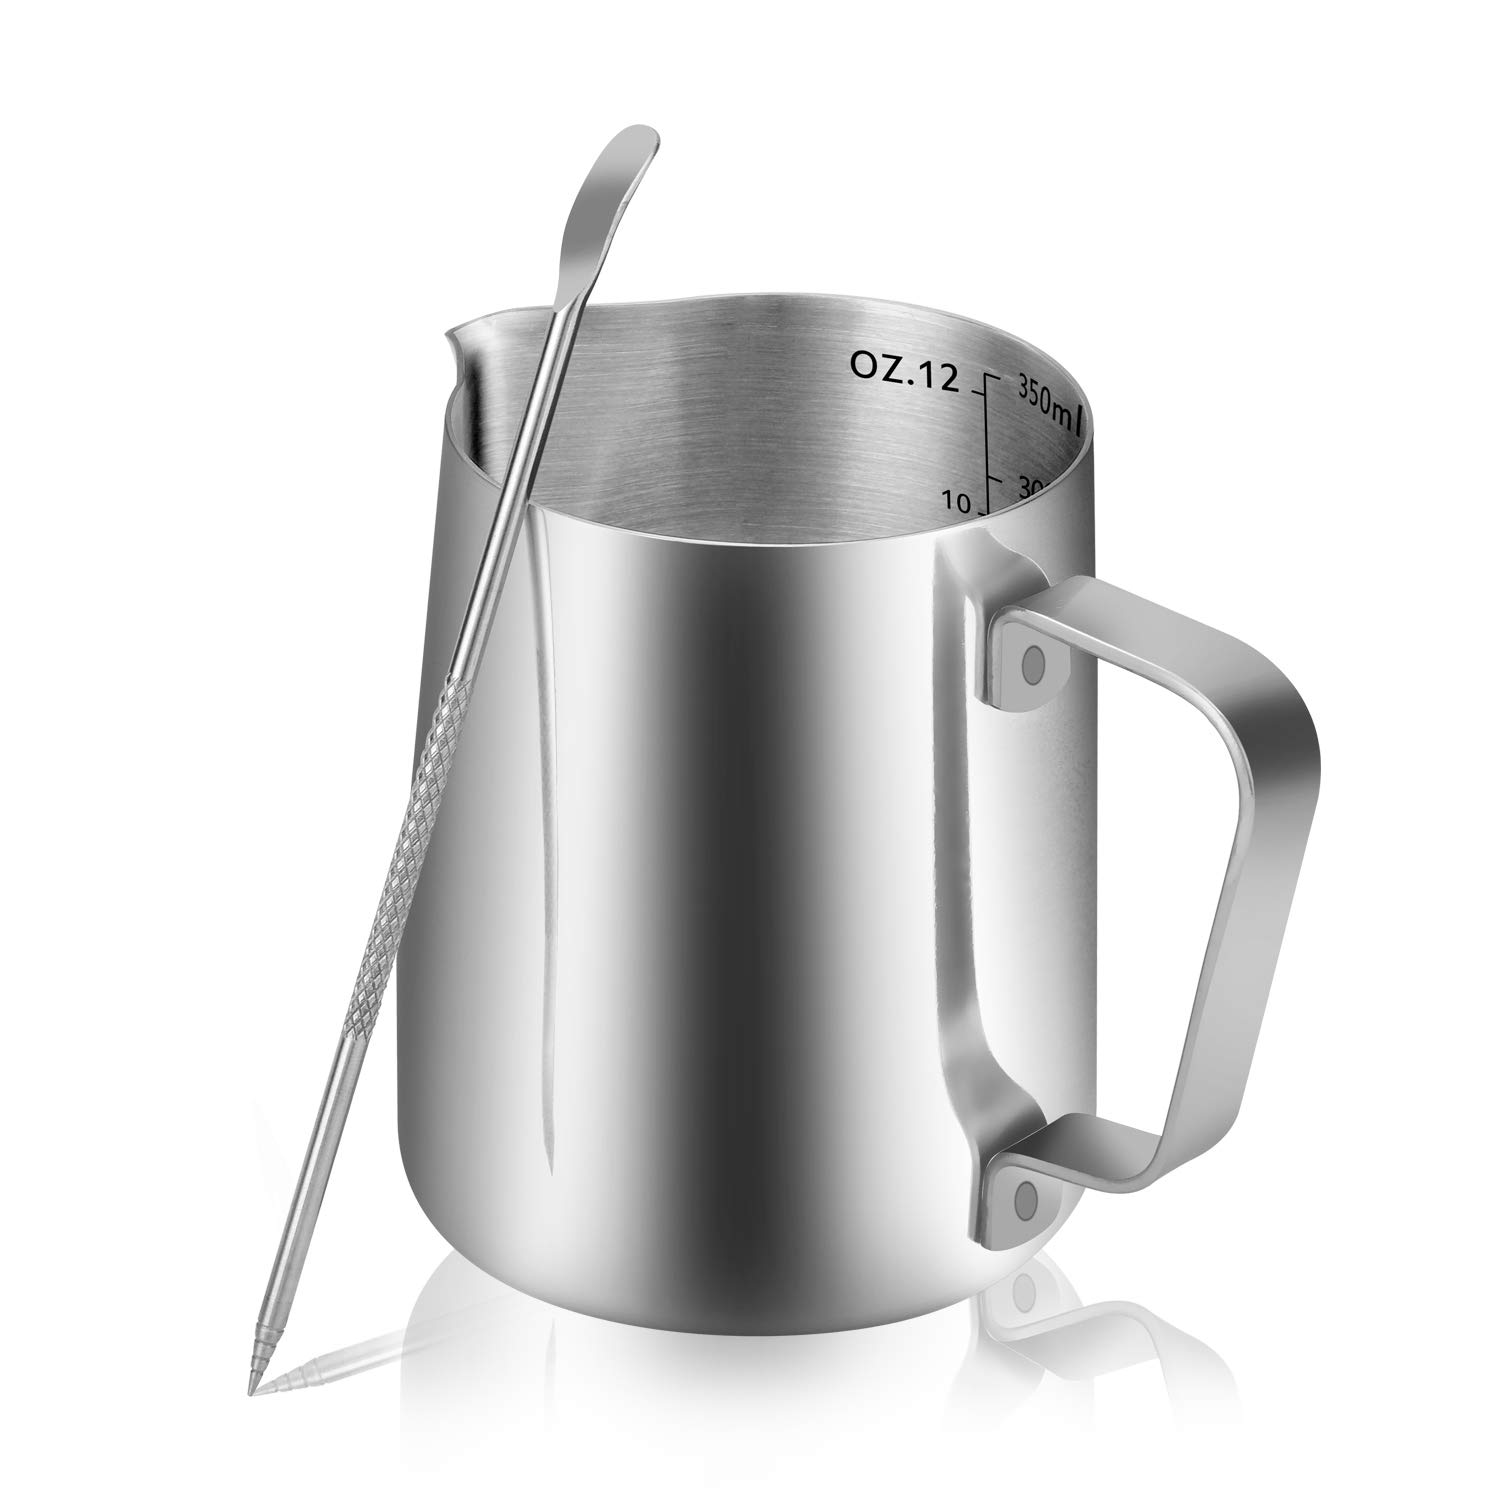 ZOZIKASER Milk Frothing Pitcher,Steaming Pitchers 12oz,Espresso Steaming Pitcher with Latt Art Pen,Frother cup for Making coffee